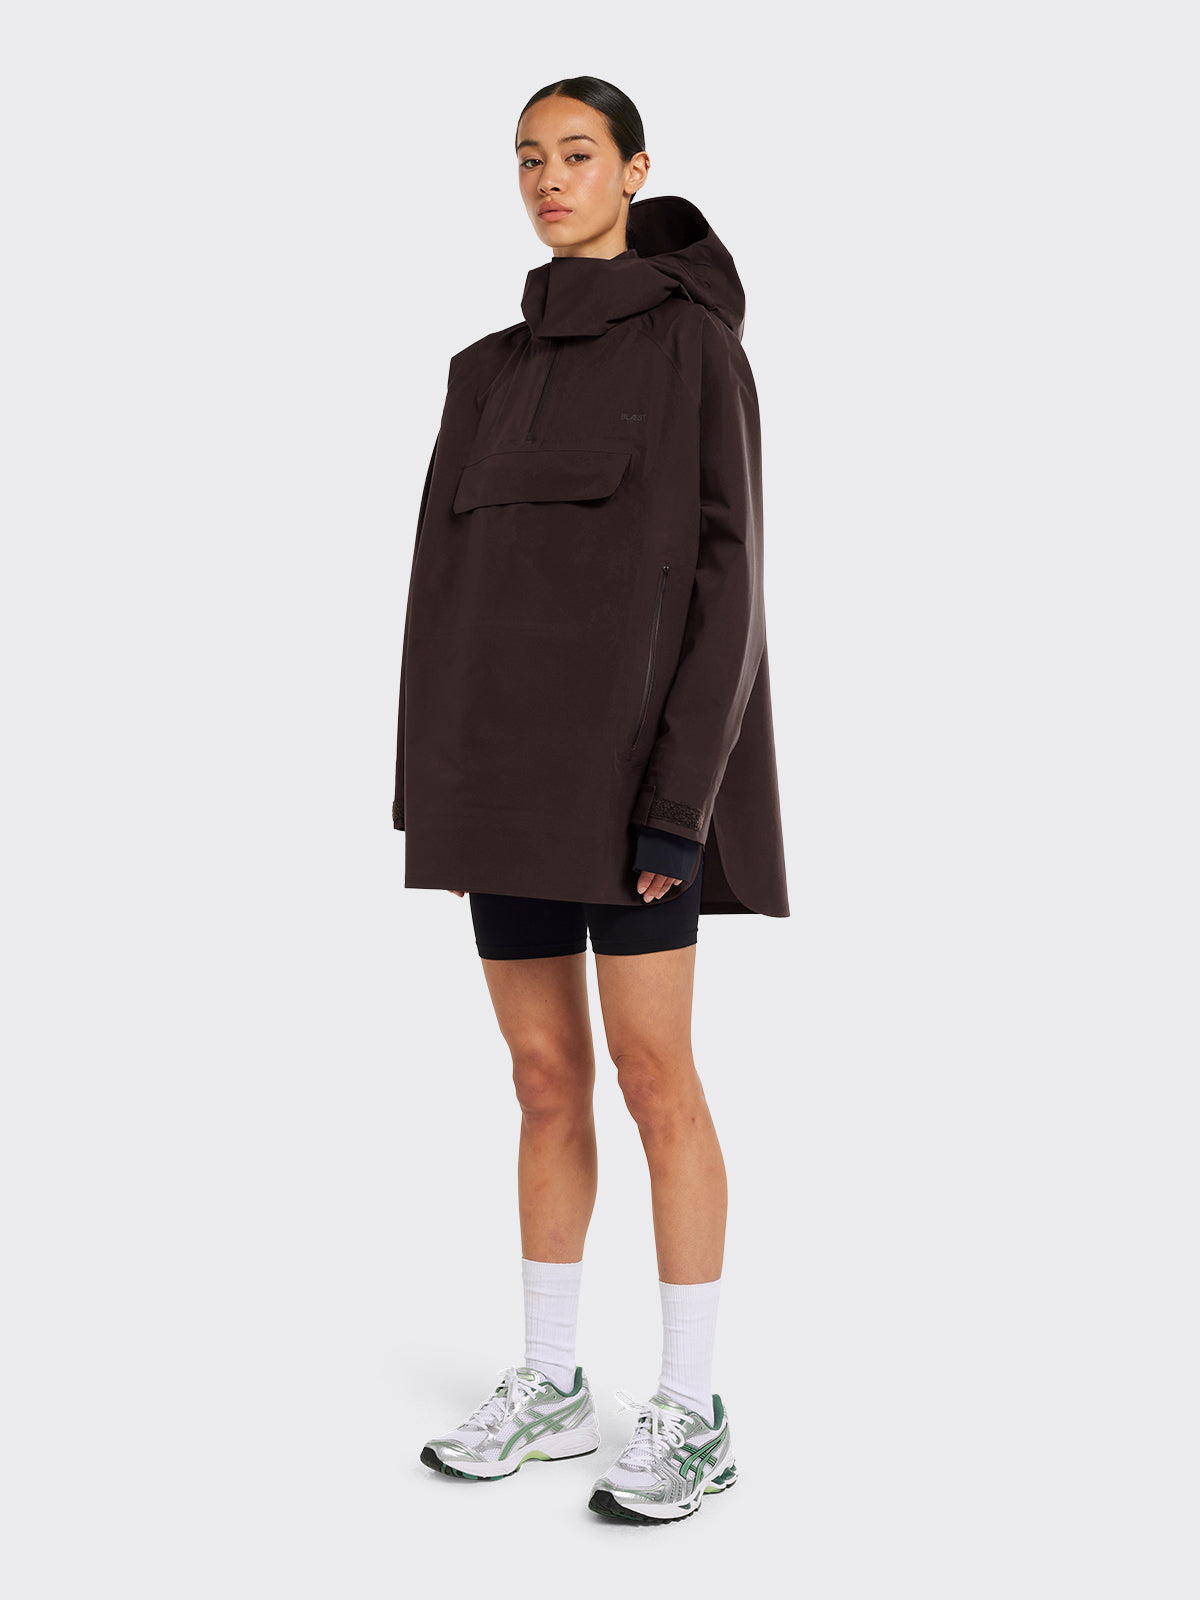 Woman wearing Voss poncho in the color Java by Blæst